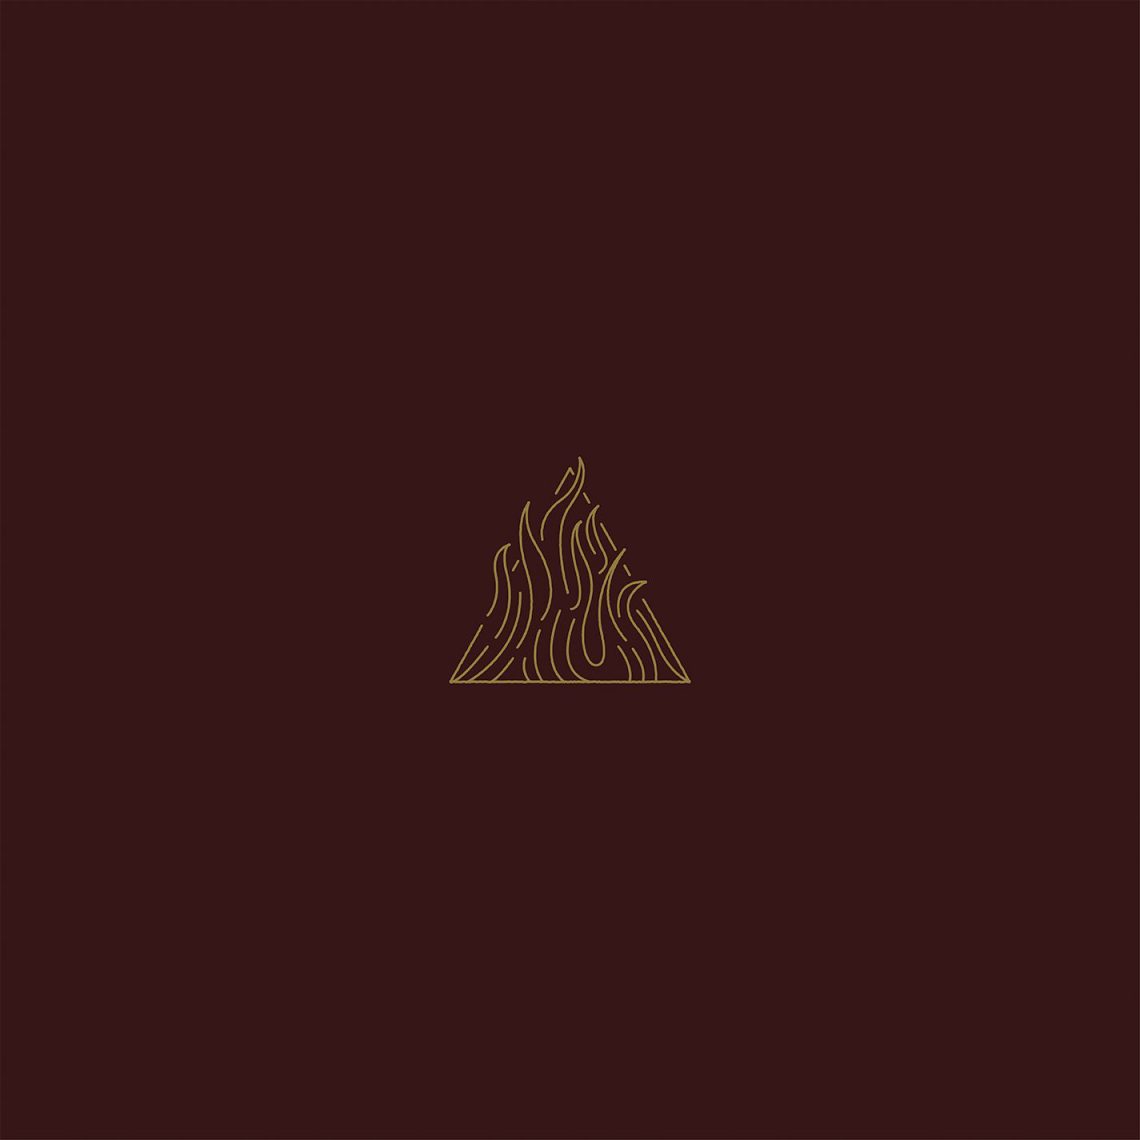 TRIVIUM – THE SIN AND THE SENTENCE ALBUM REVIEW